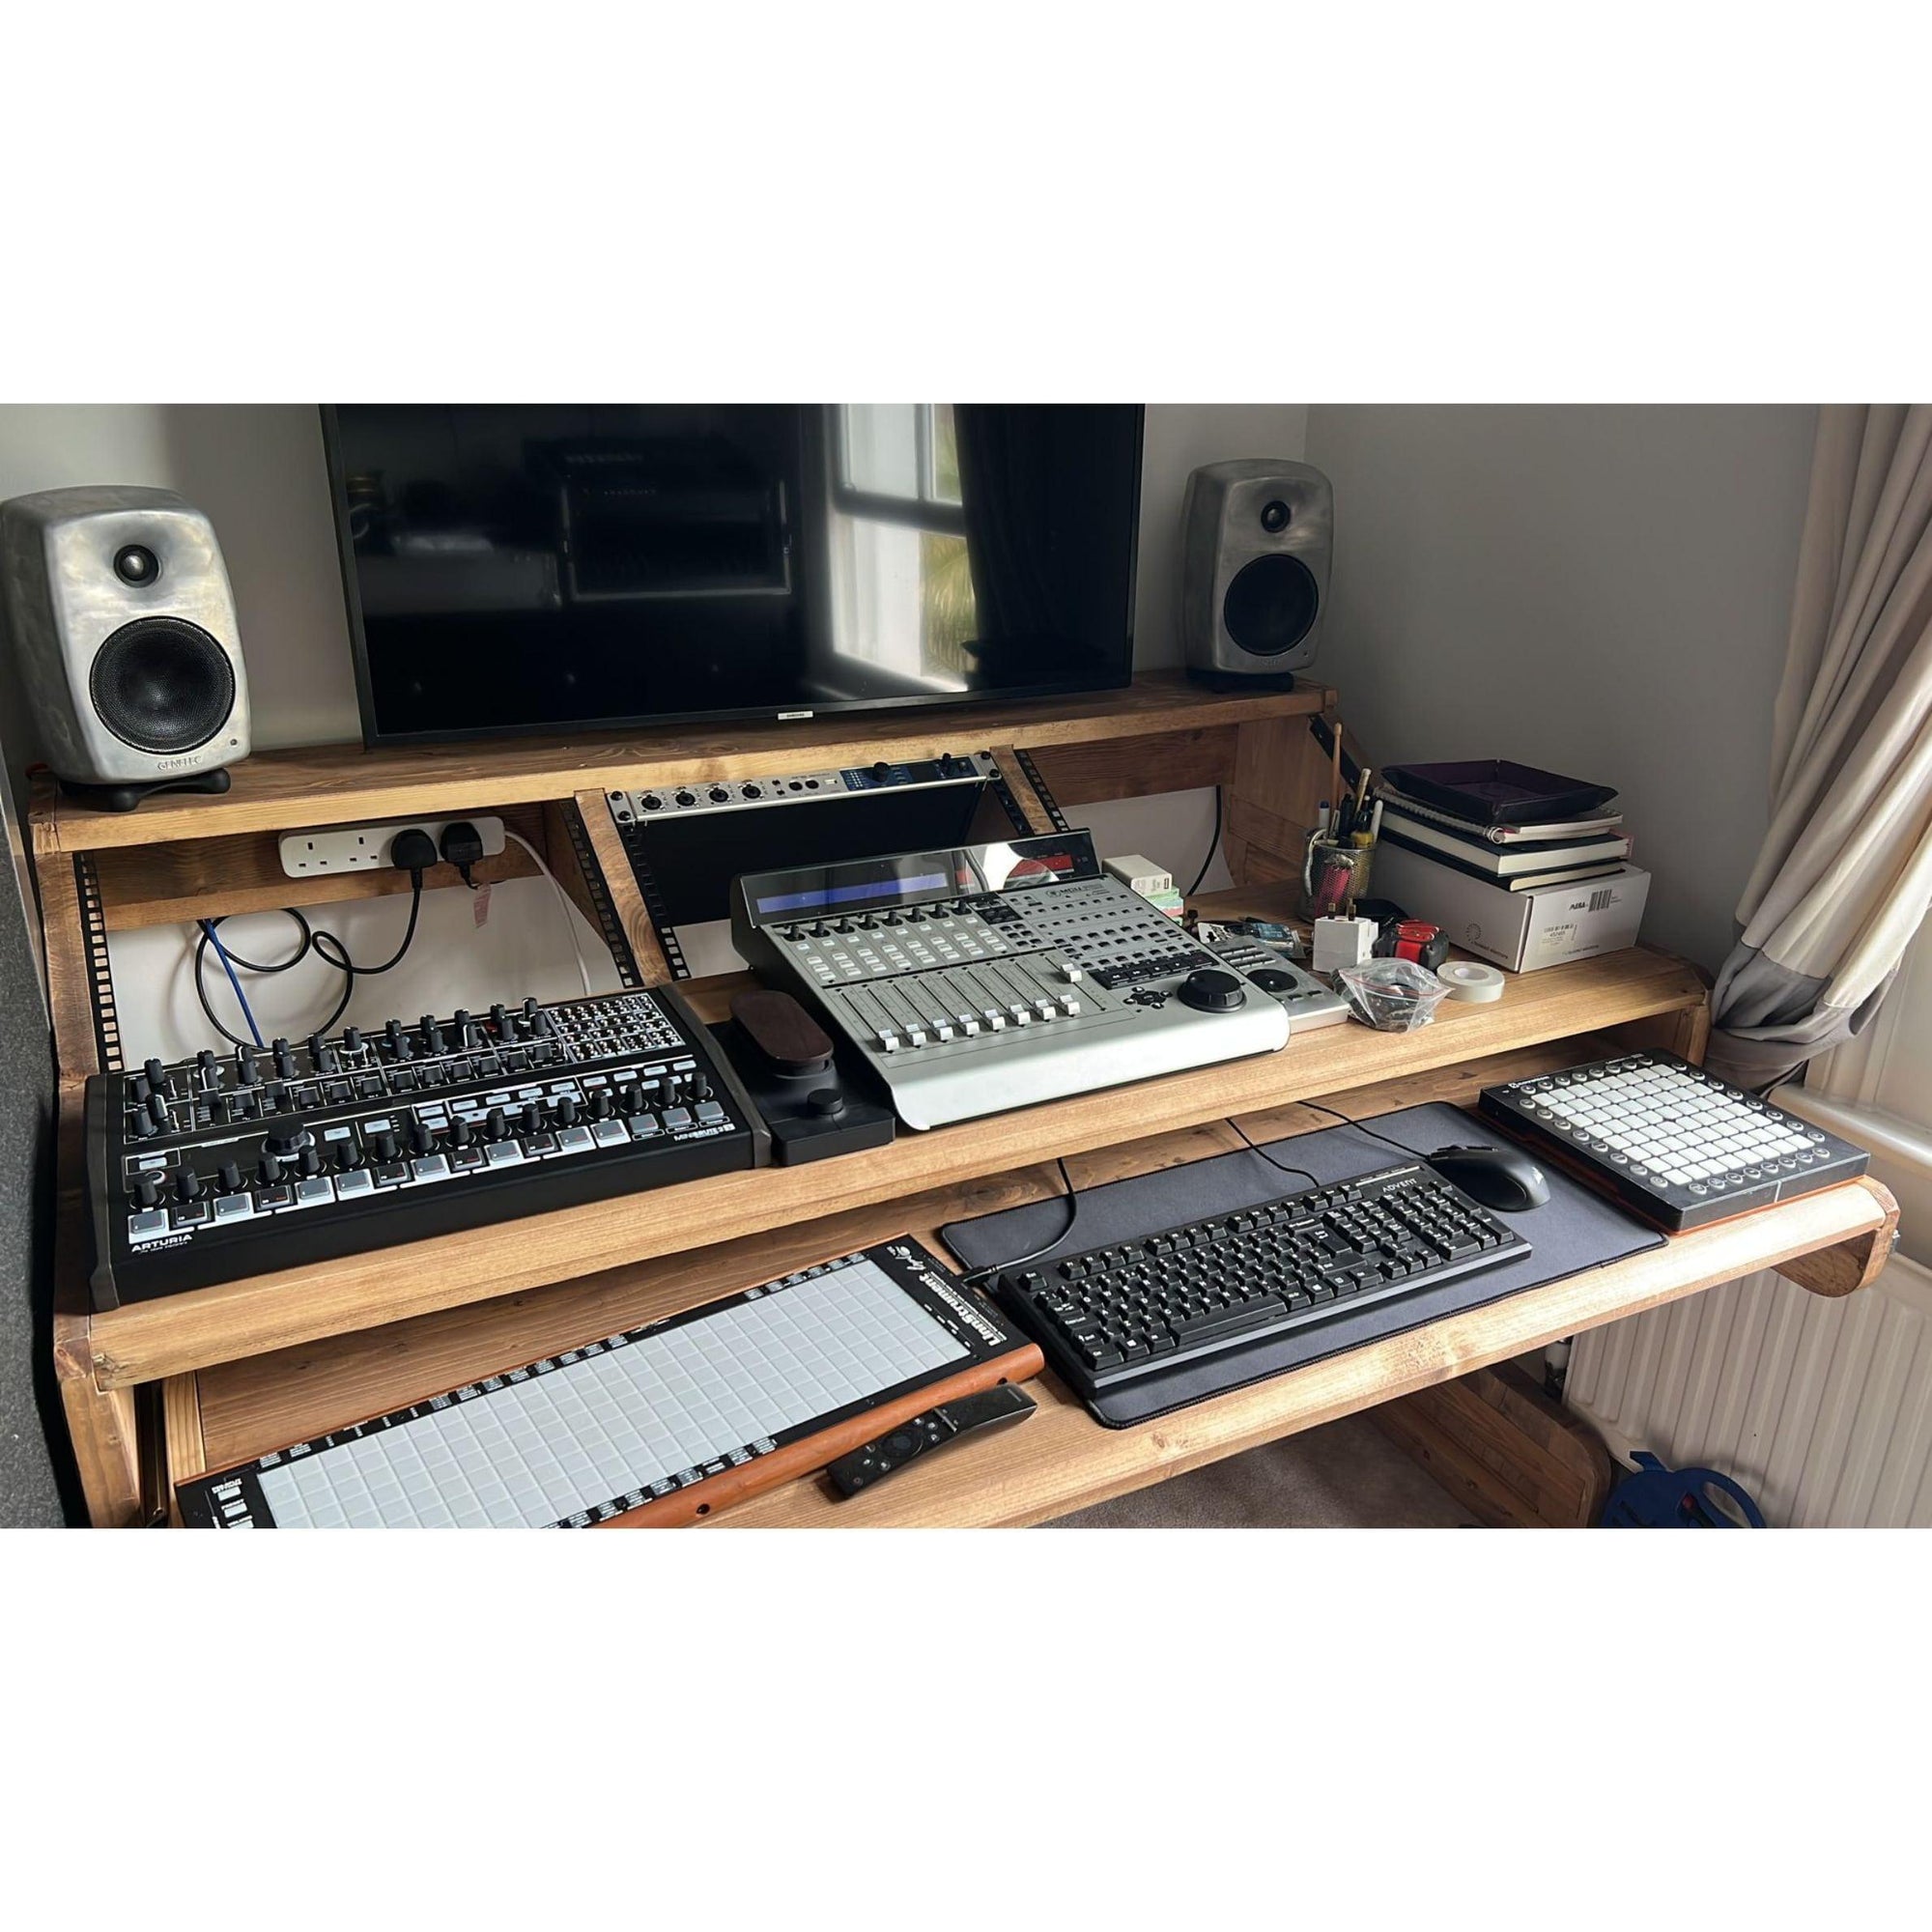 NOVA: Musician's Studio Desk with Rugged Keyboard Tray, Monitor Stand and 6U Racks, 3 Tiered made from Reclaimed Wood